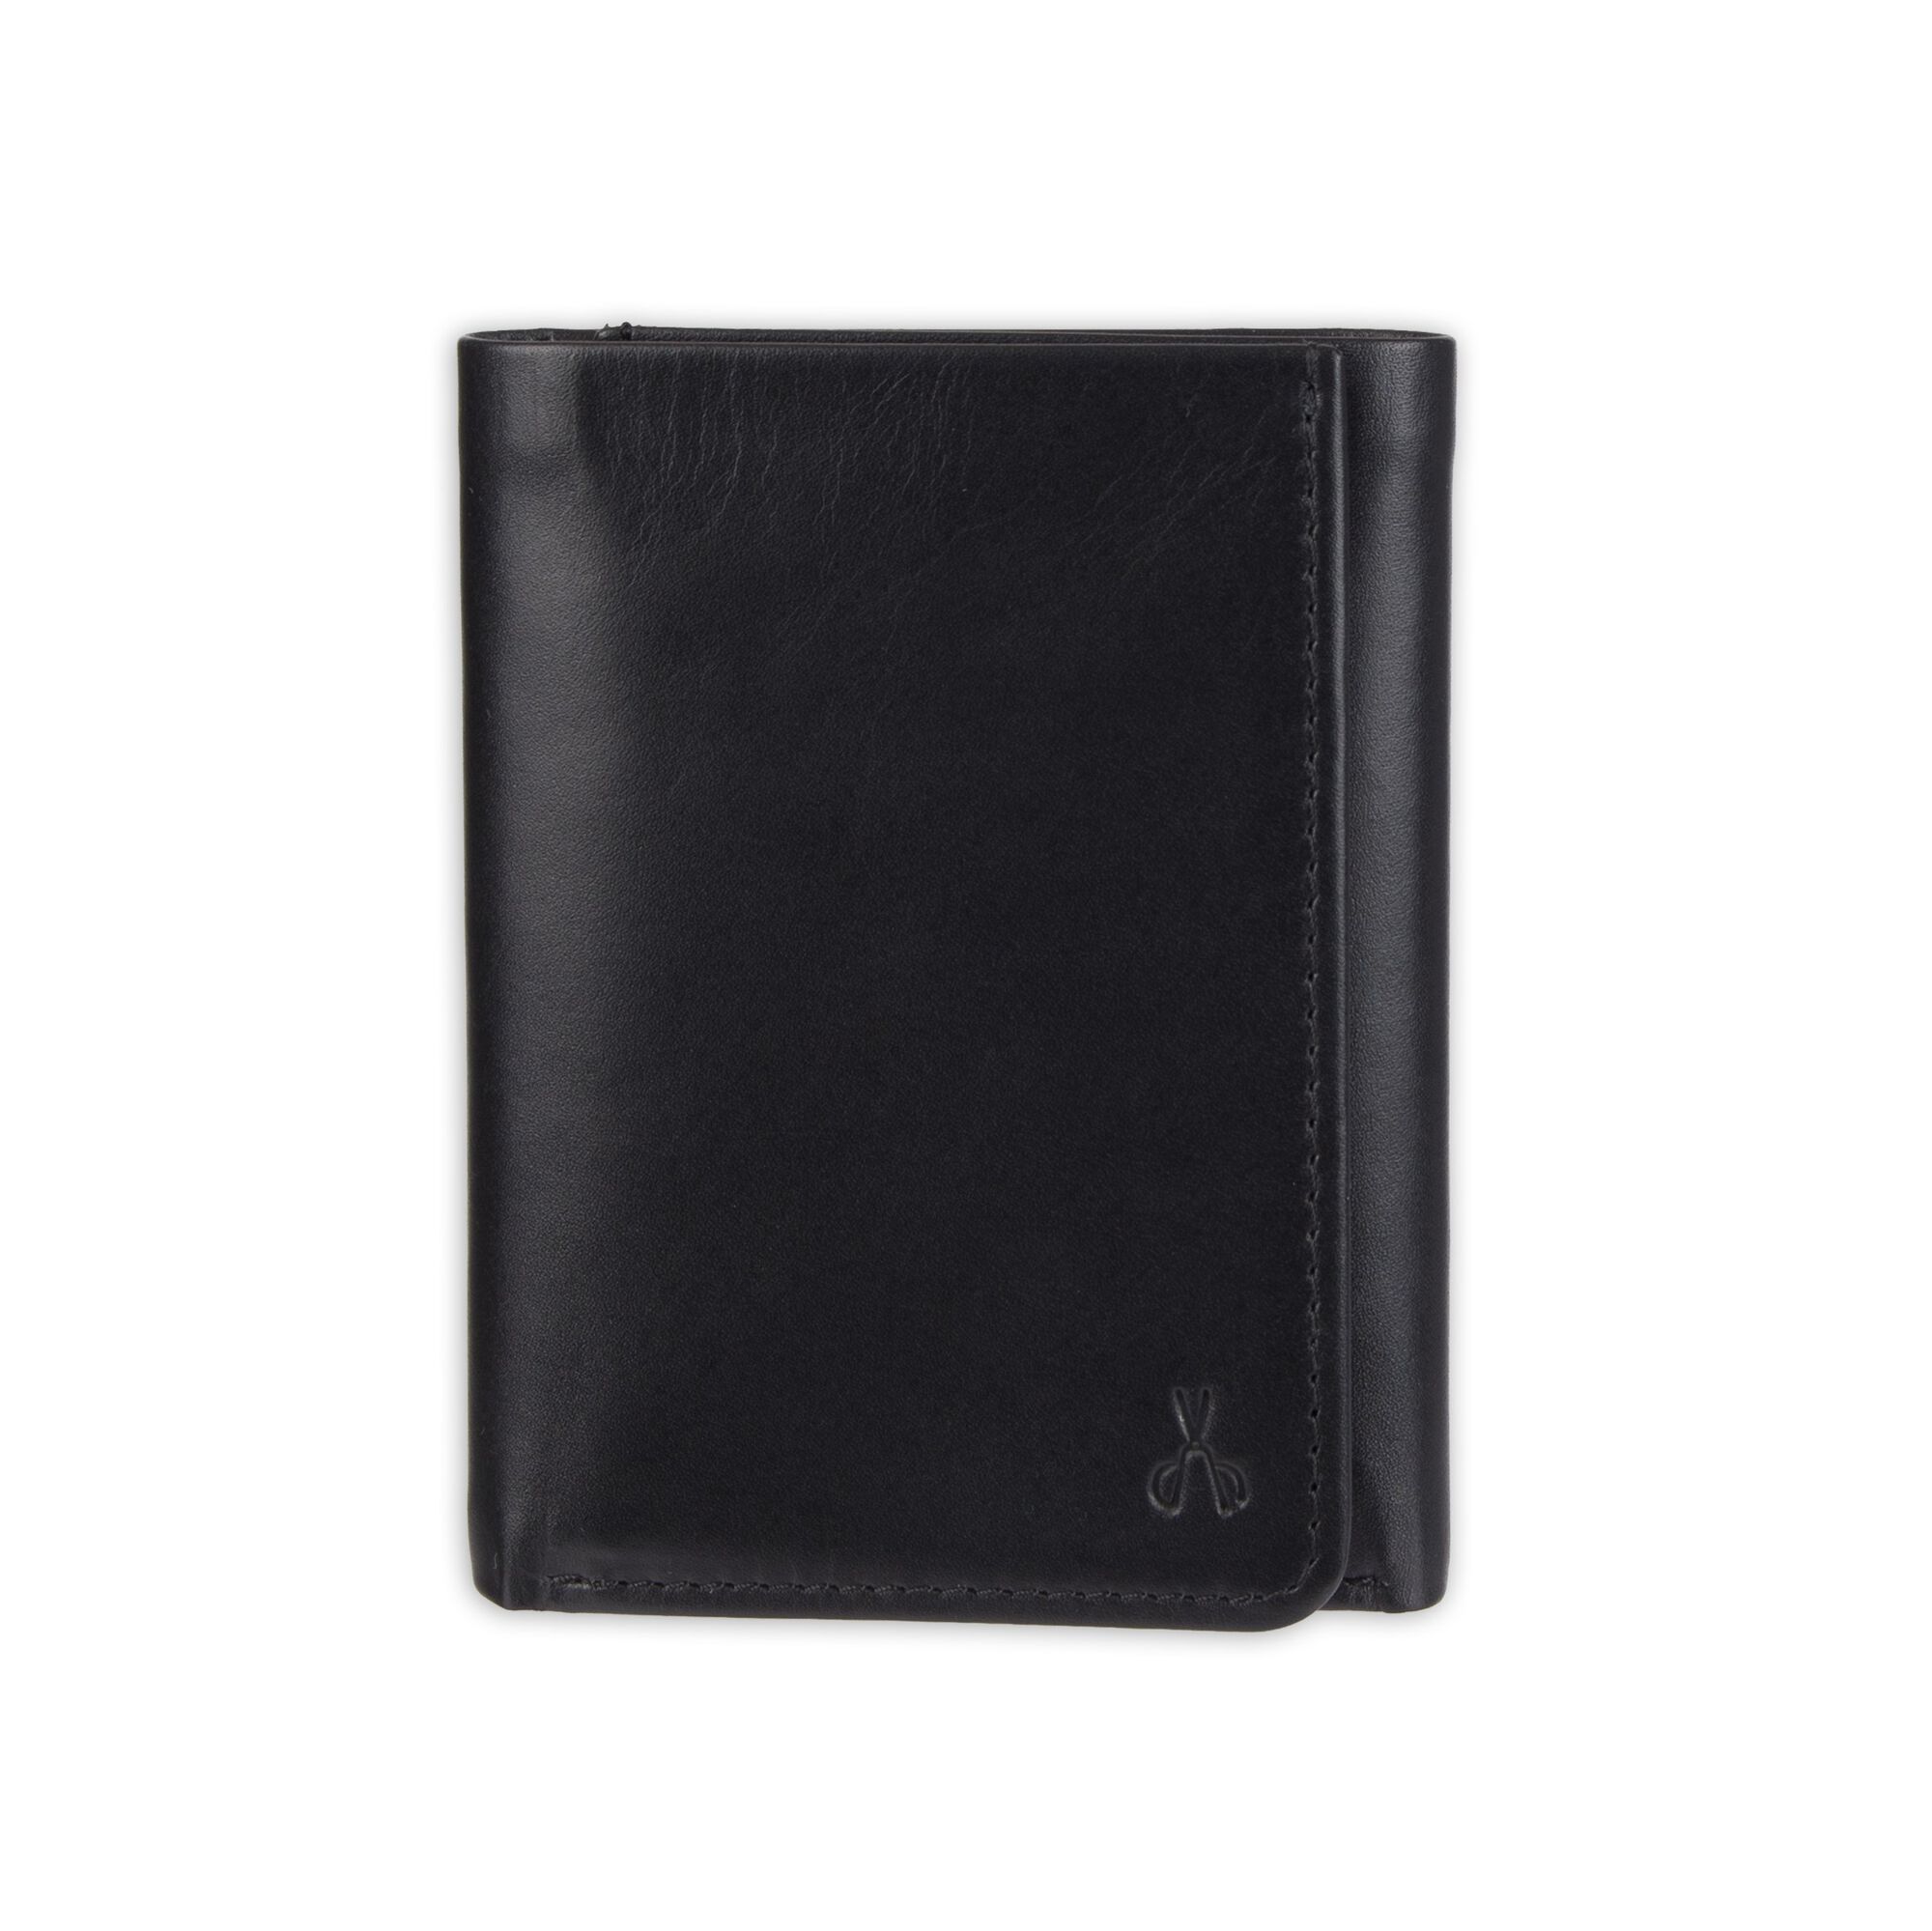 Haggar Rfid Extra Capacity Trifold Wallet - Best Dad Ever Emboss Black (31DN110009) photo